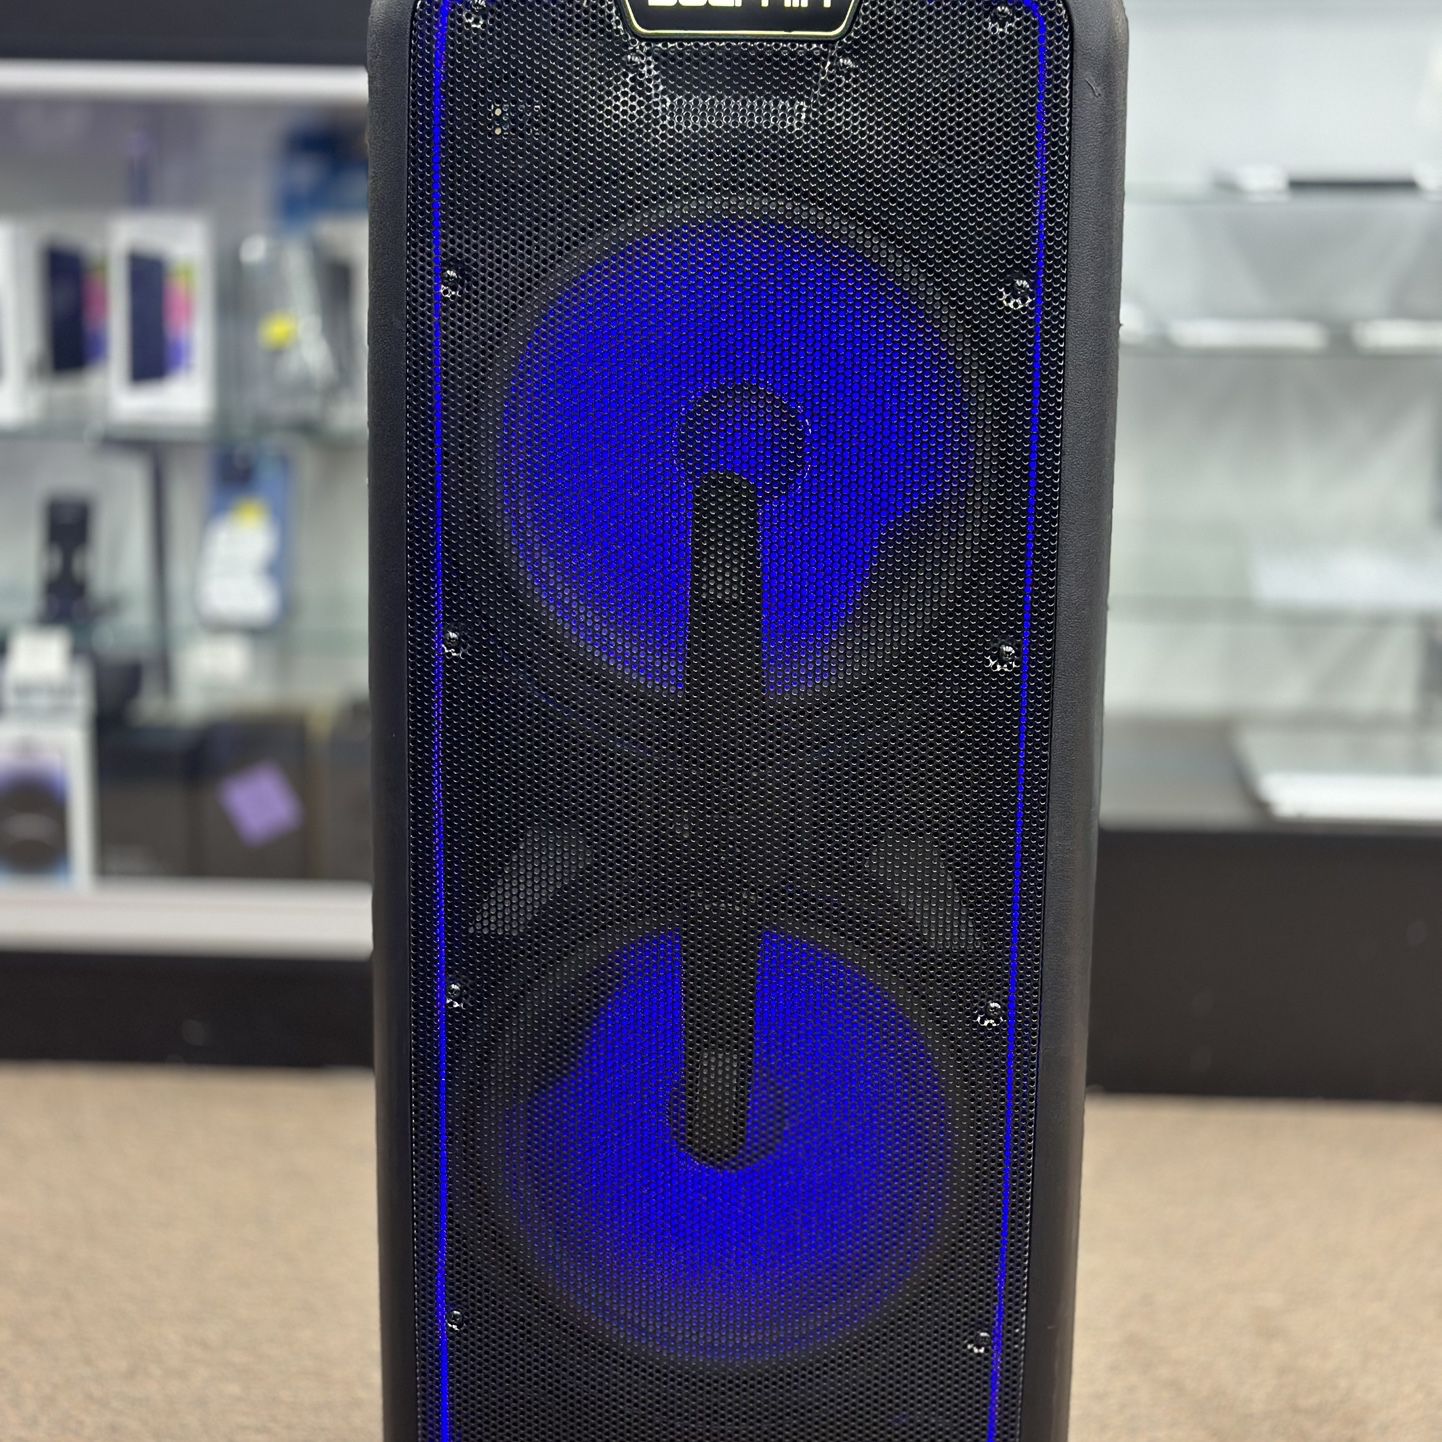 Give Mom the world: Dual 12’’ Bluetooth Party Speaker With Neon LED Lights